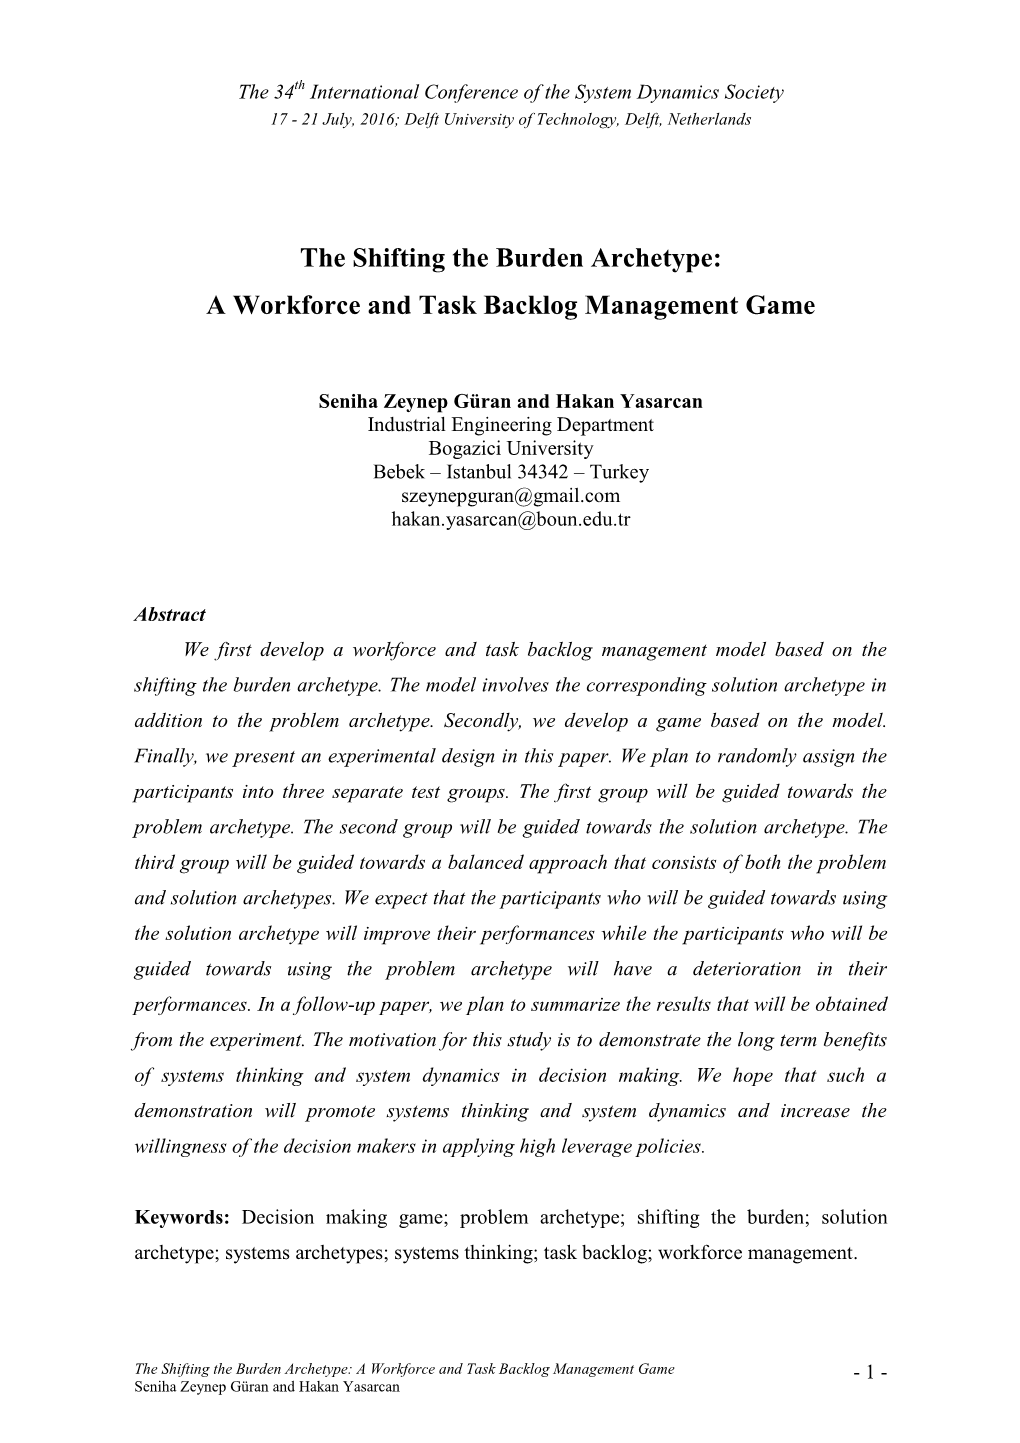 The Shifting the Burden Archetype: a Workforce and Task Backlog Management Game